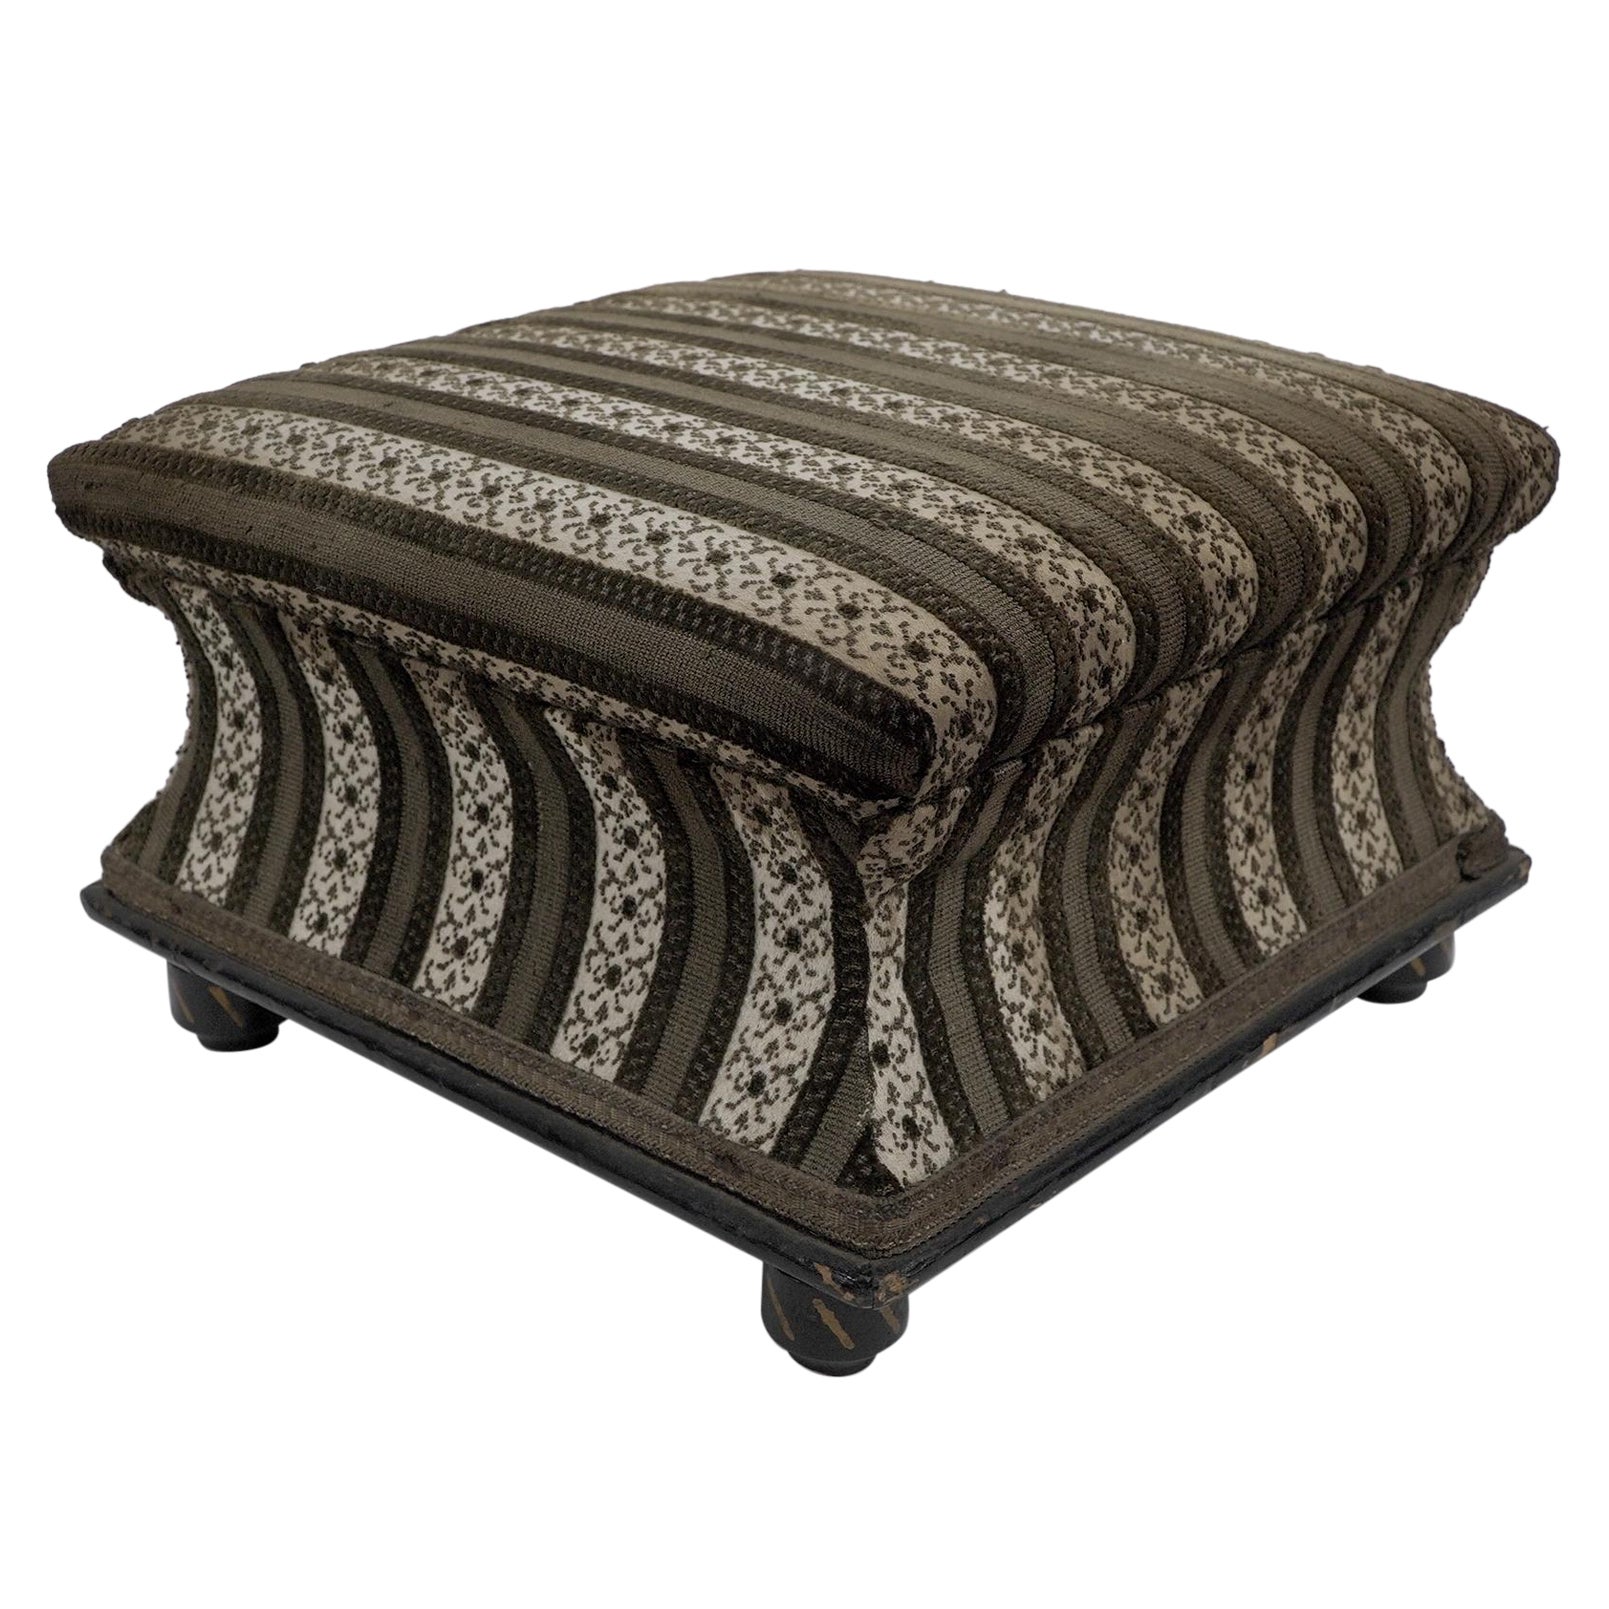 An Aesthetic Movement ebonized & gilded foot stool with striped upholstery.